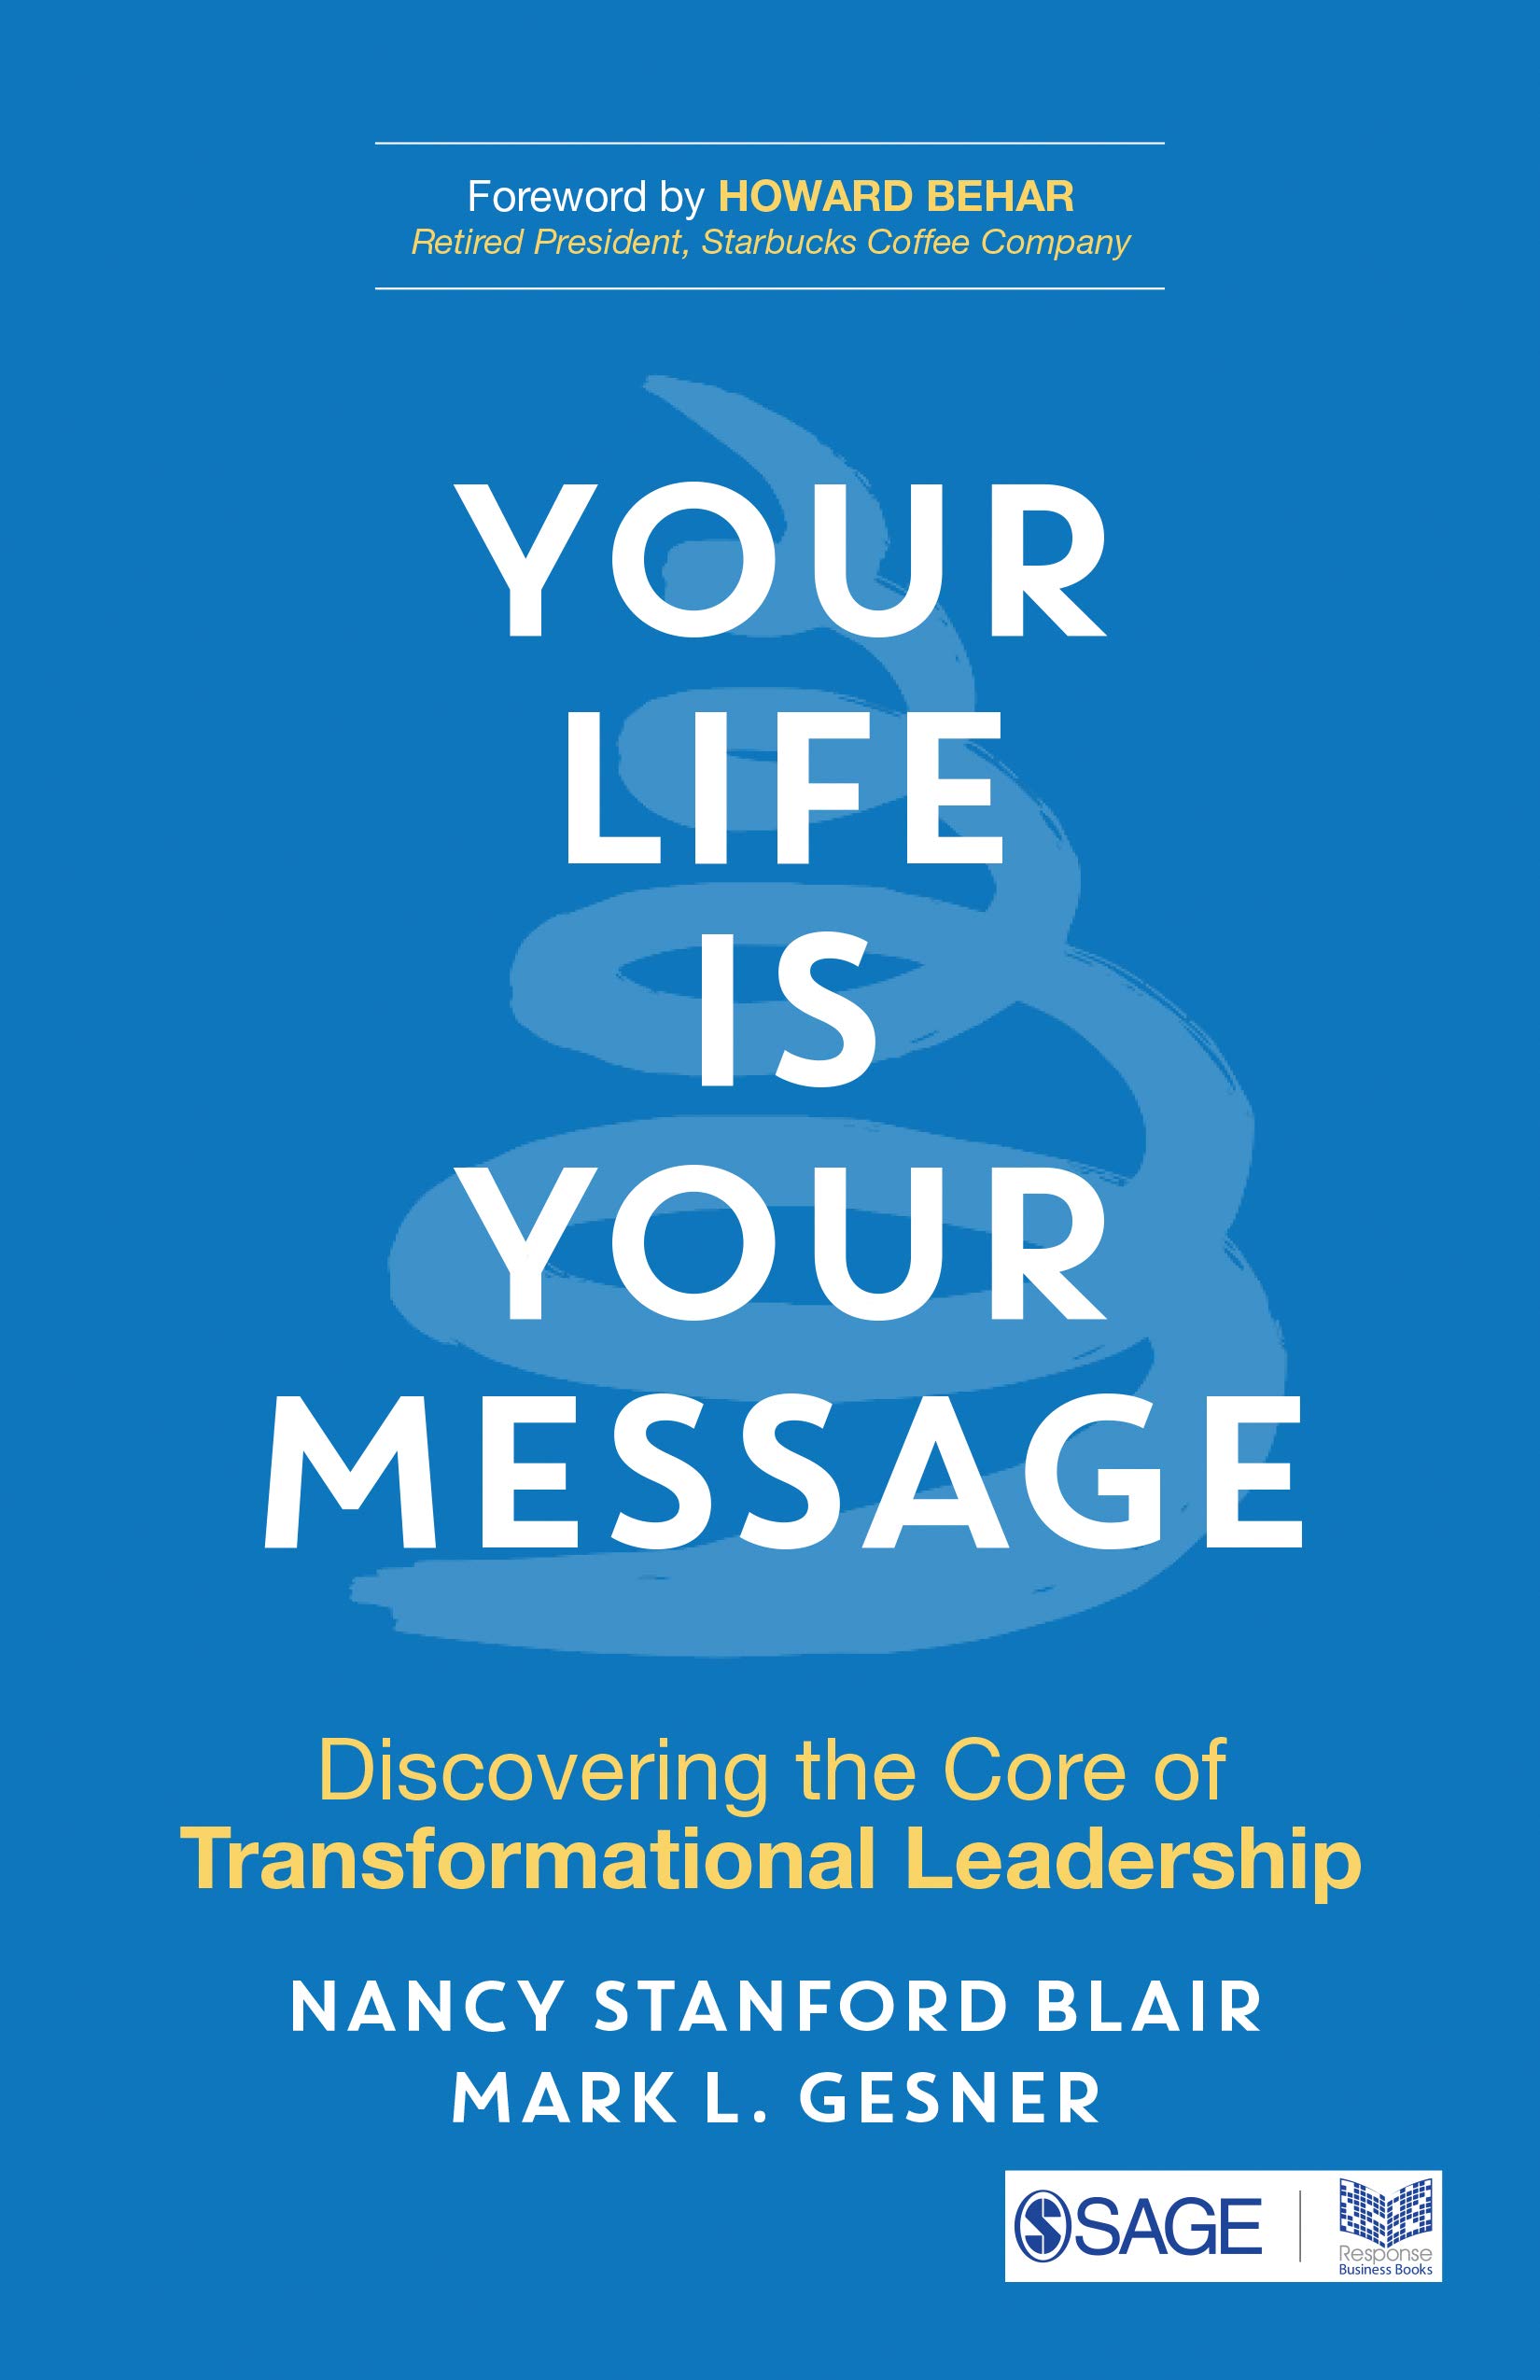 Your Life is Your Message | Nancy Stanford Blair, Mark L. Gesner image1